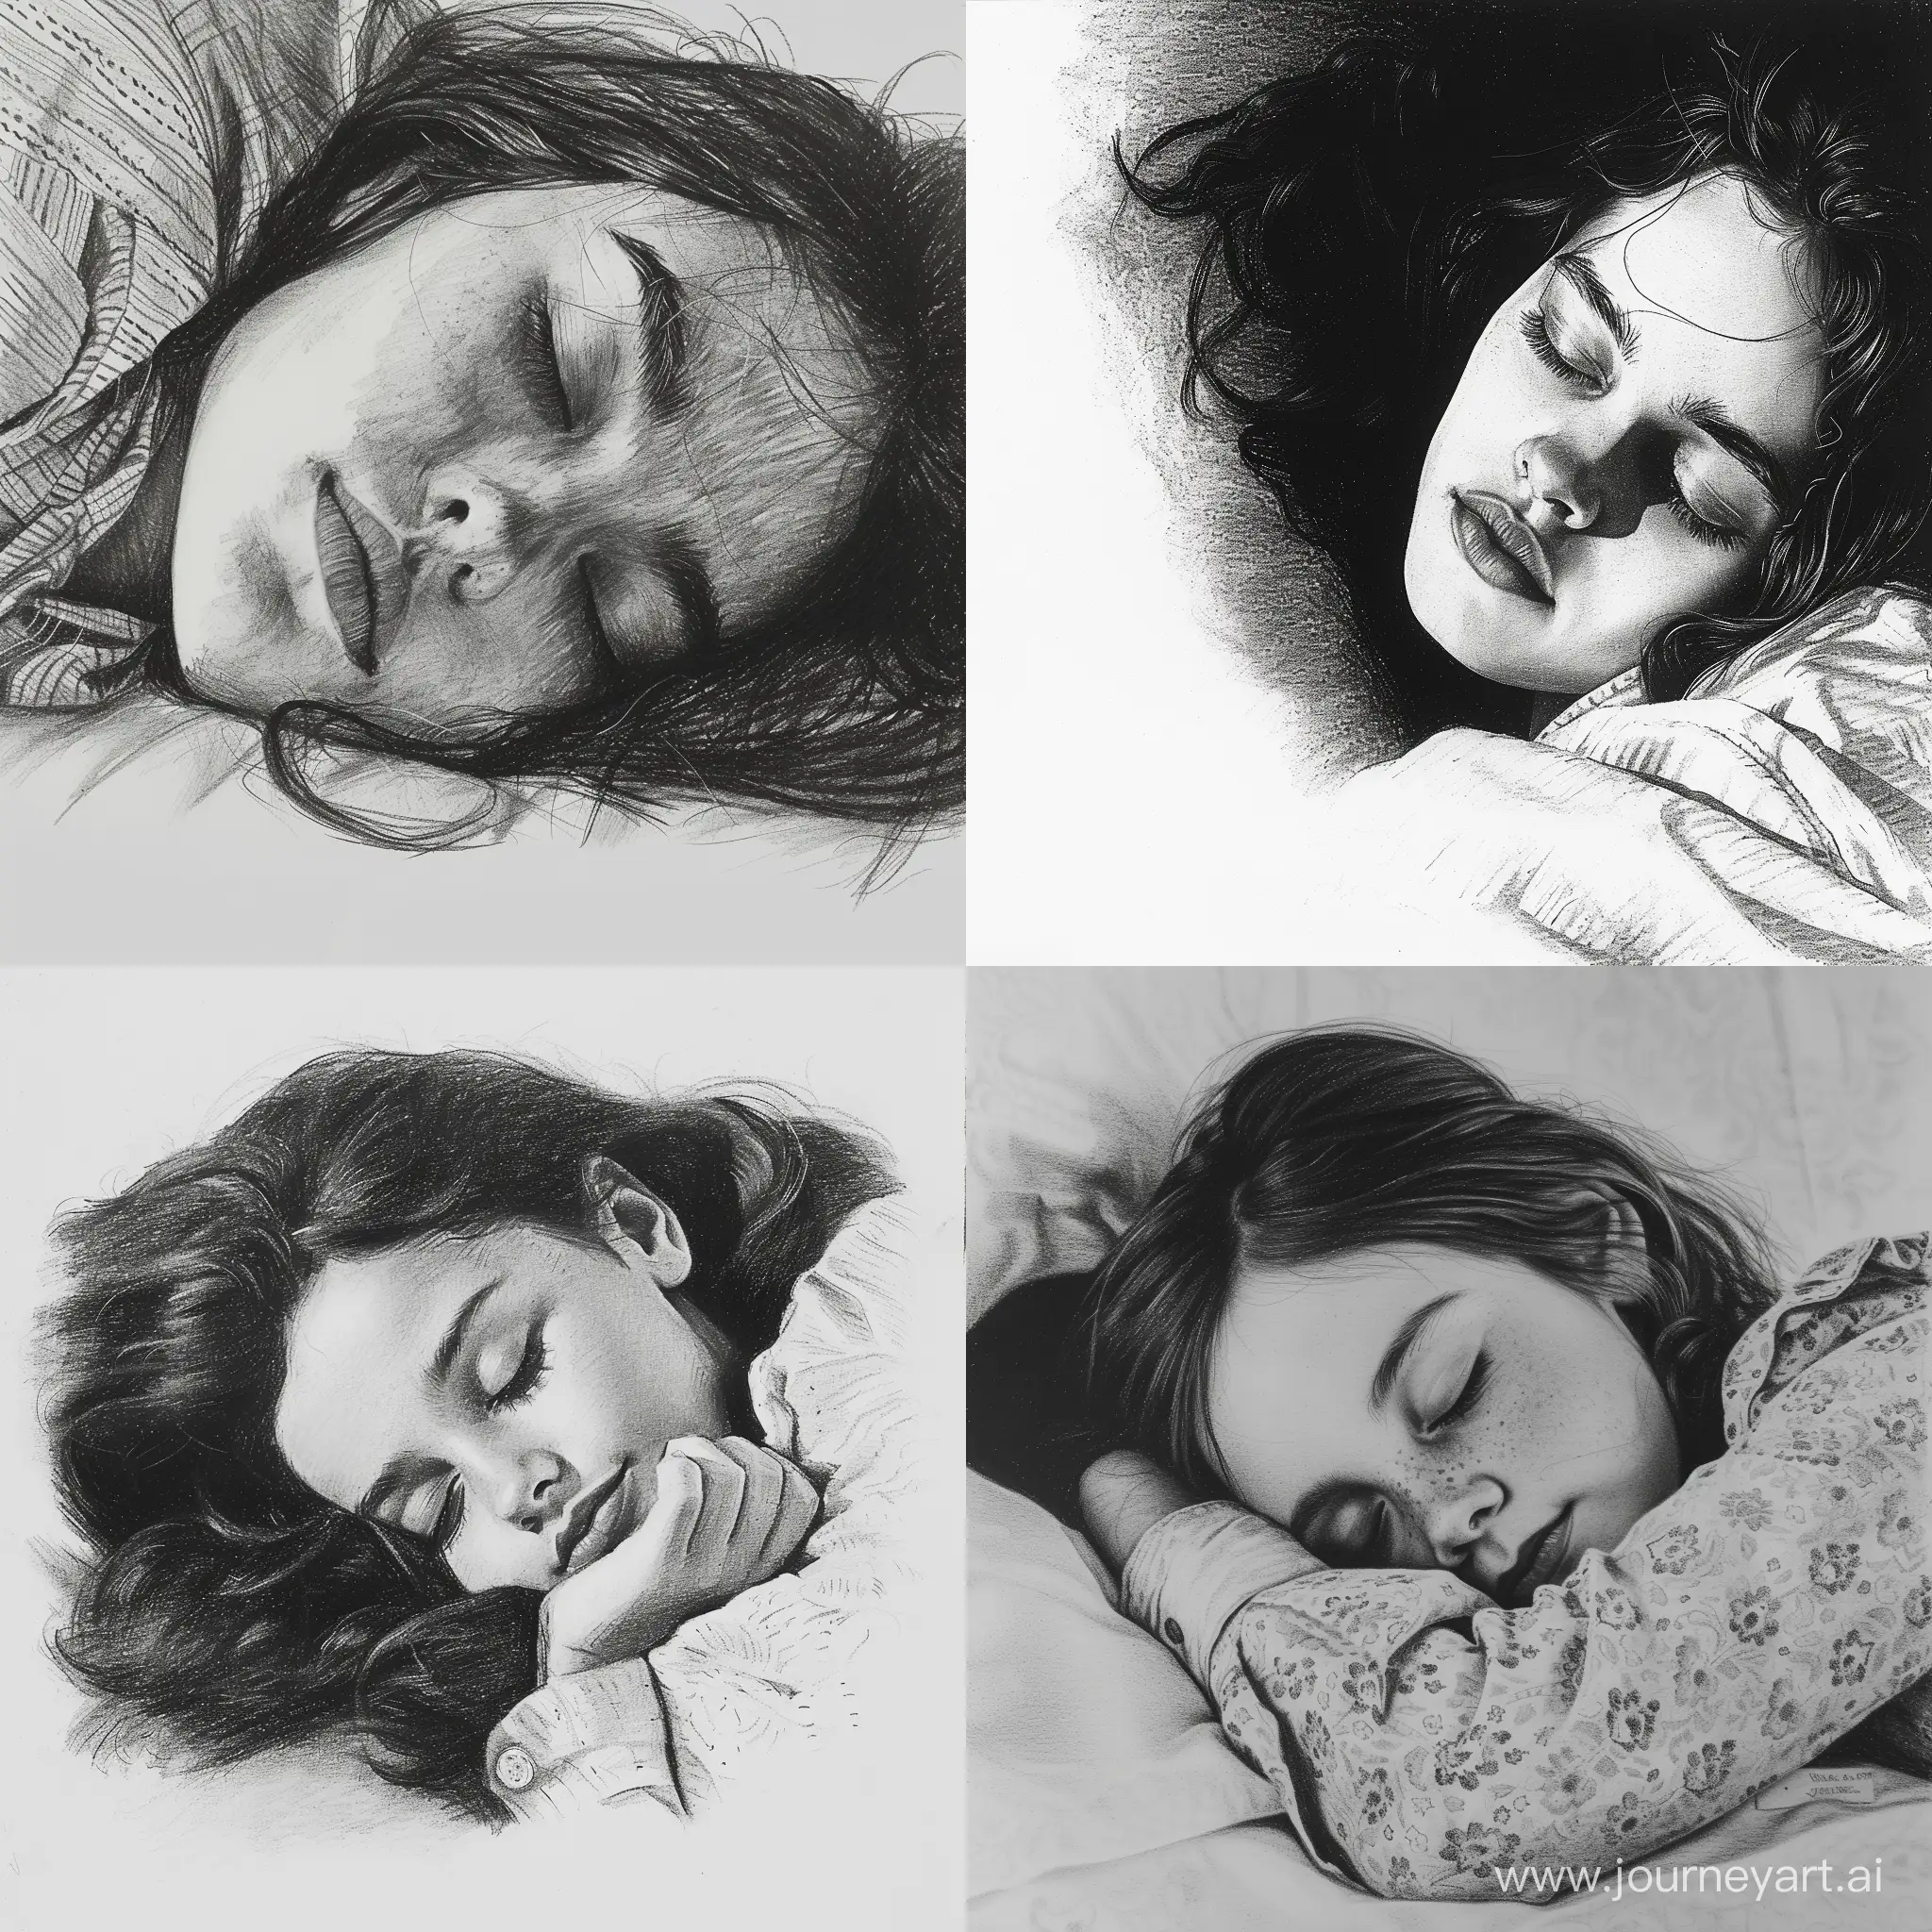 Peaceful-Slumber-Captivating-Pencil-and-Charcoal-Drawing-of-a-Sleeping-Girl